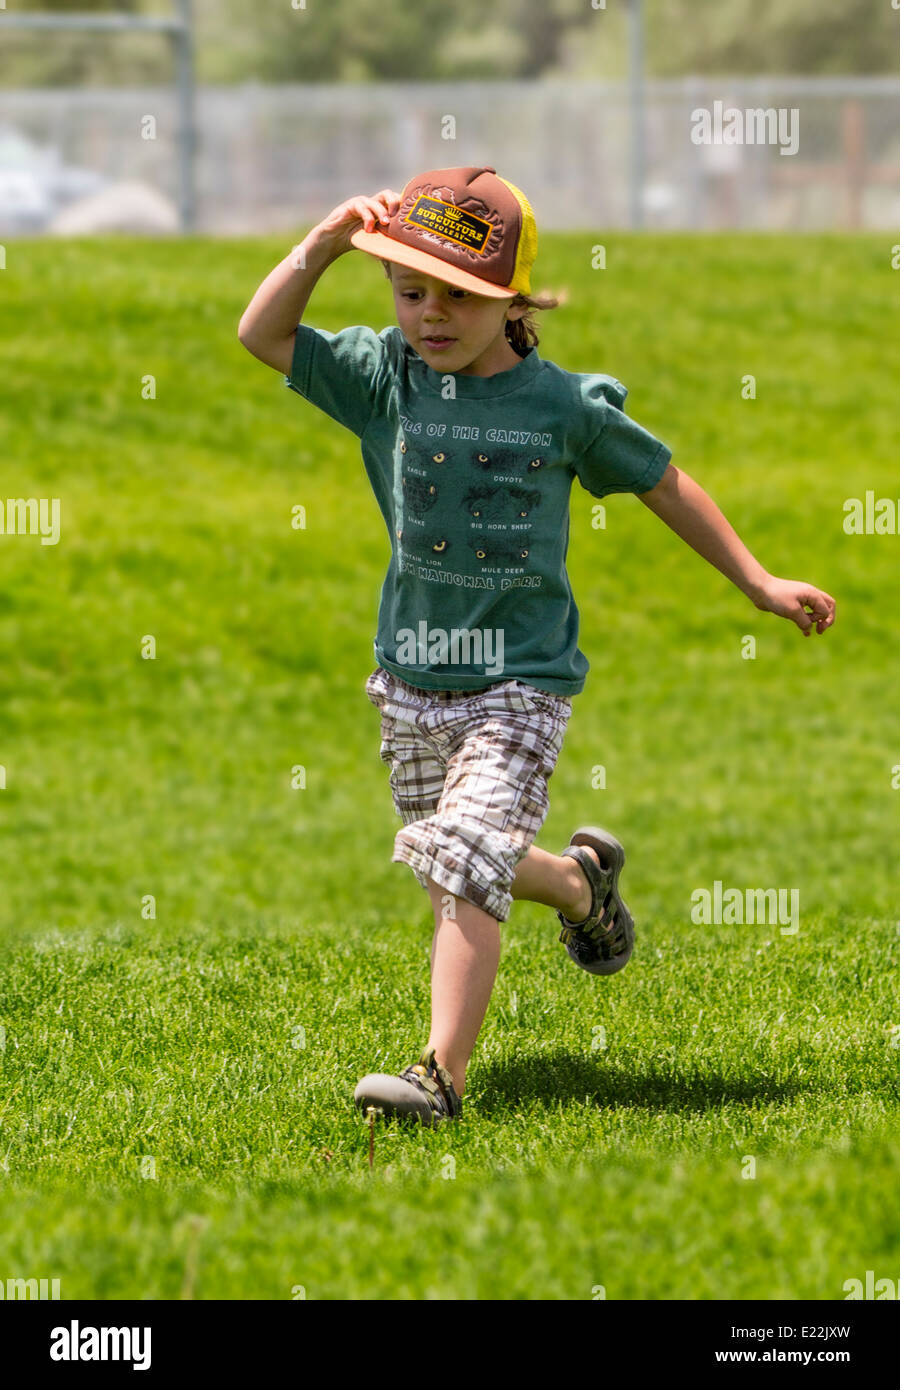 Young boy running on a grassy park field Stock Photo